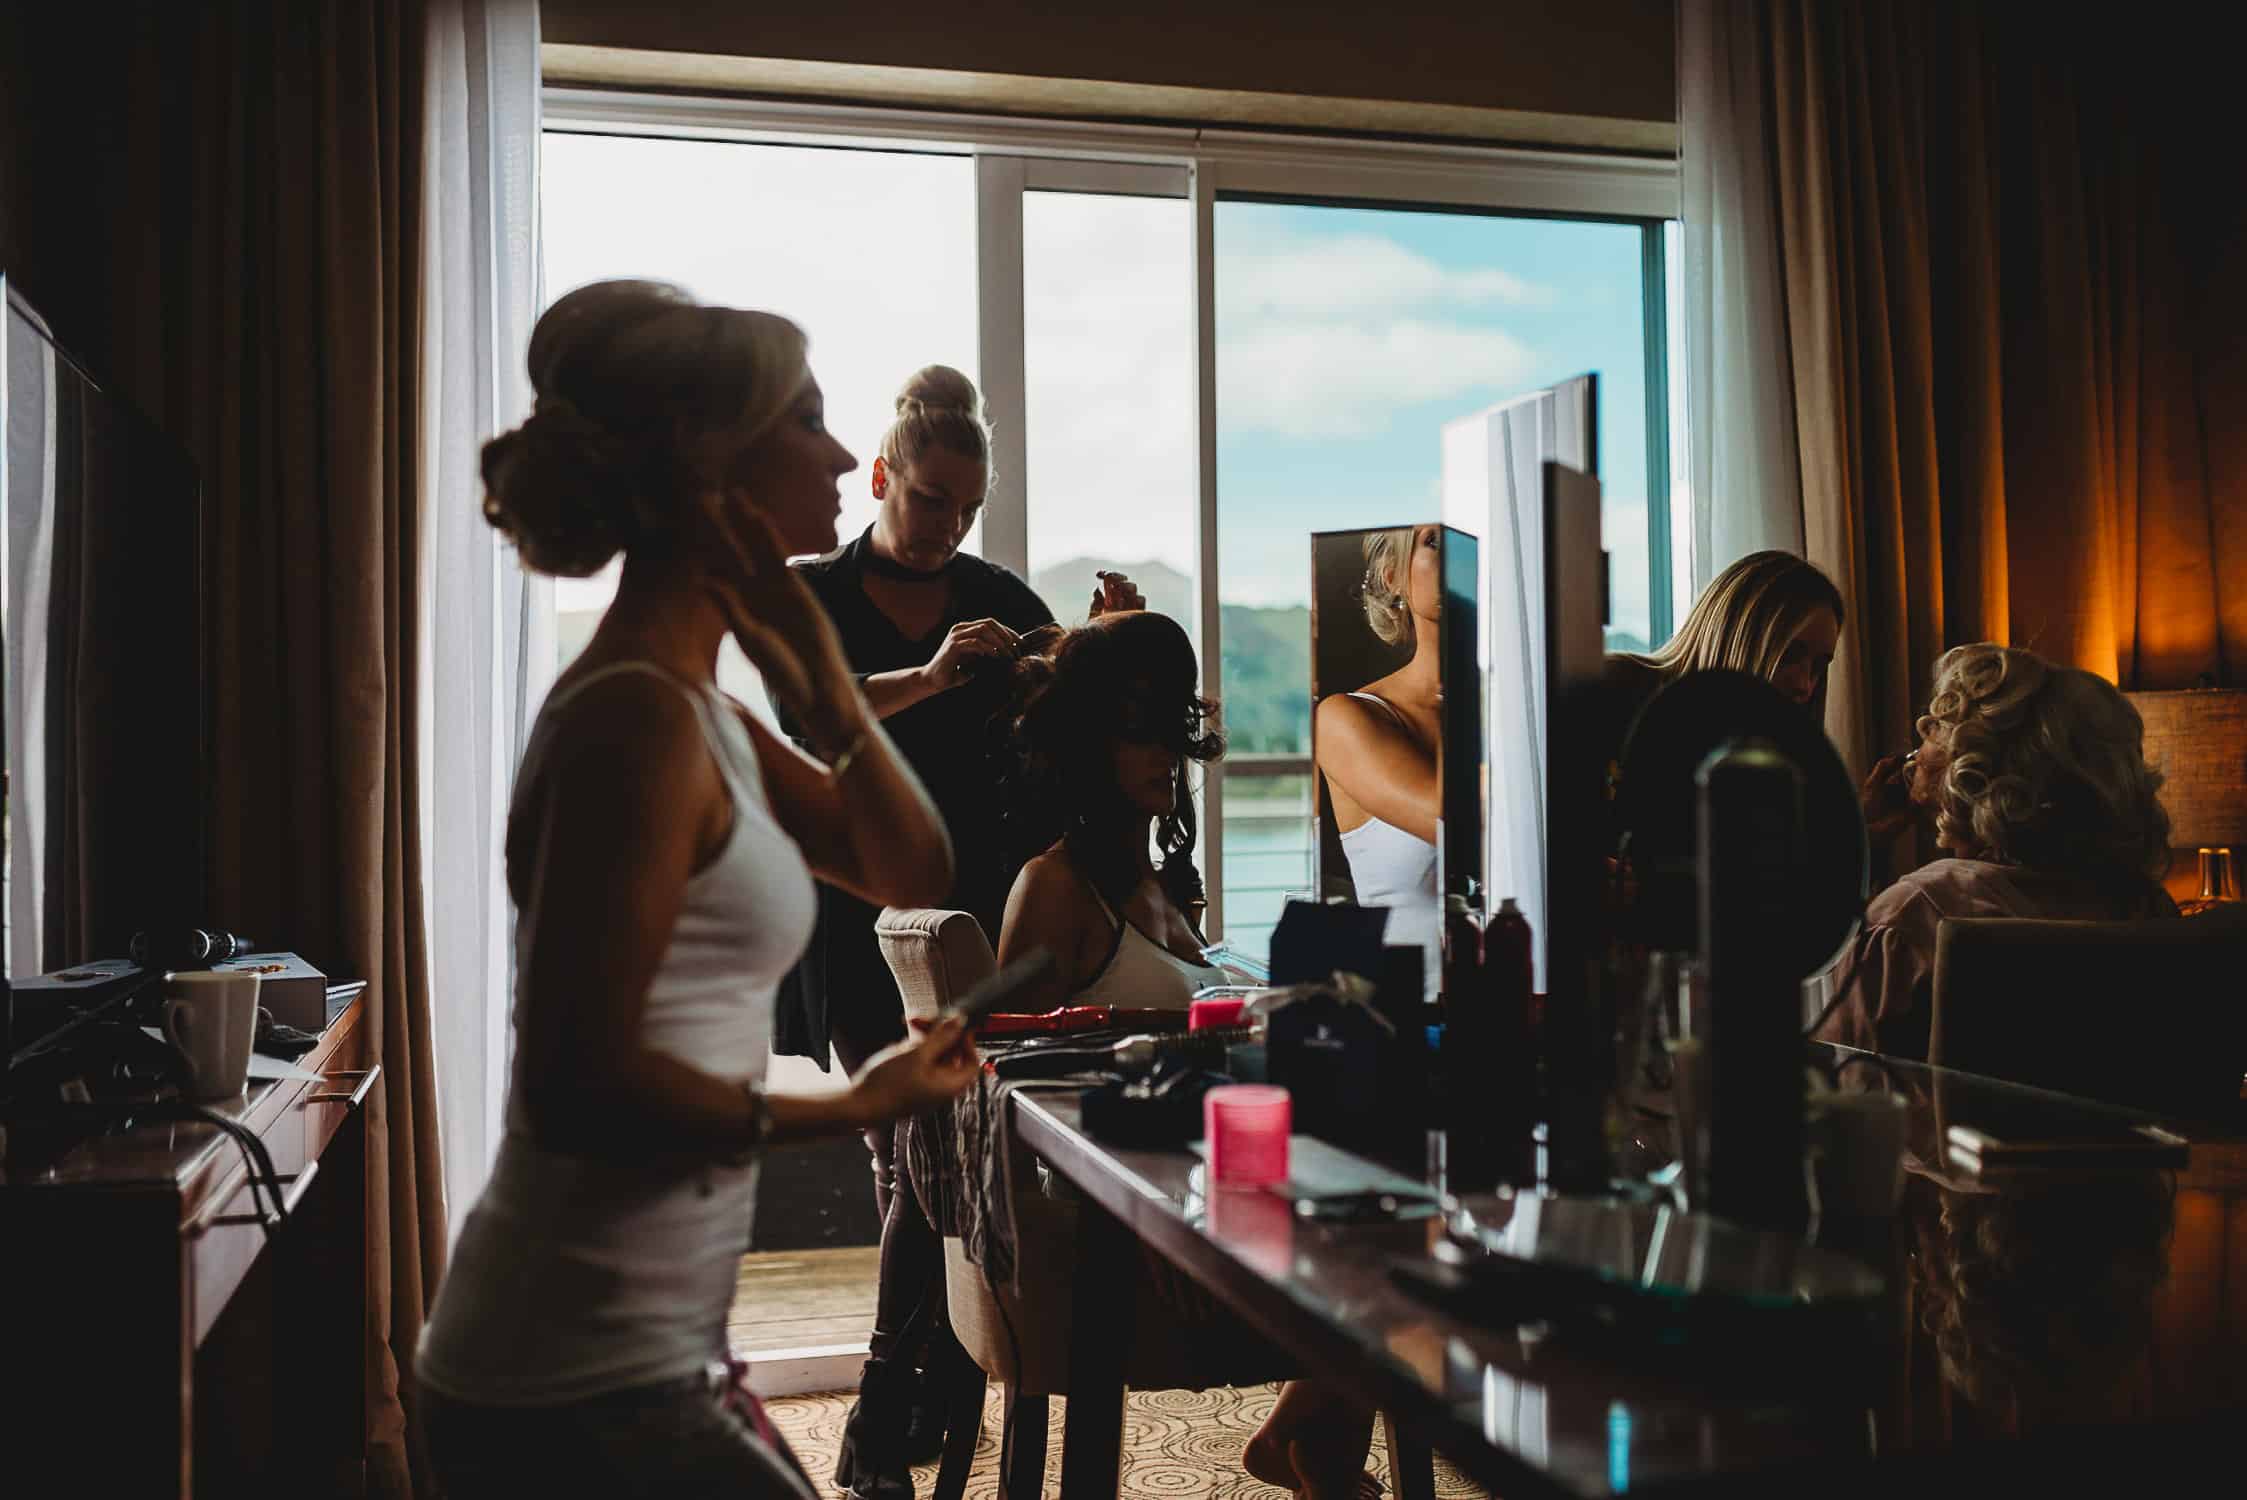 The Quay Hotel Wedding Photographer in Conwy North Wales bridal prep at The Quay Hotel in Deganwy